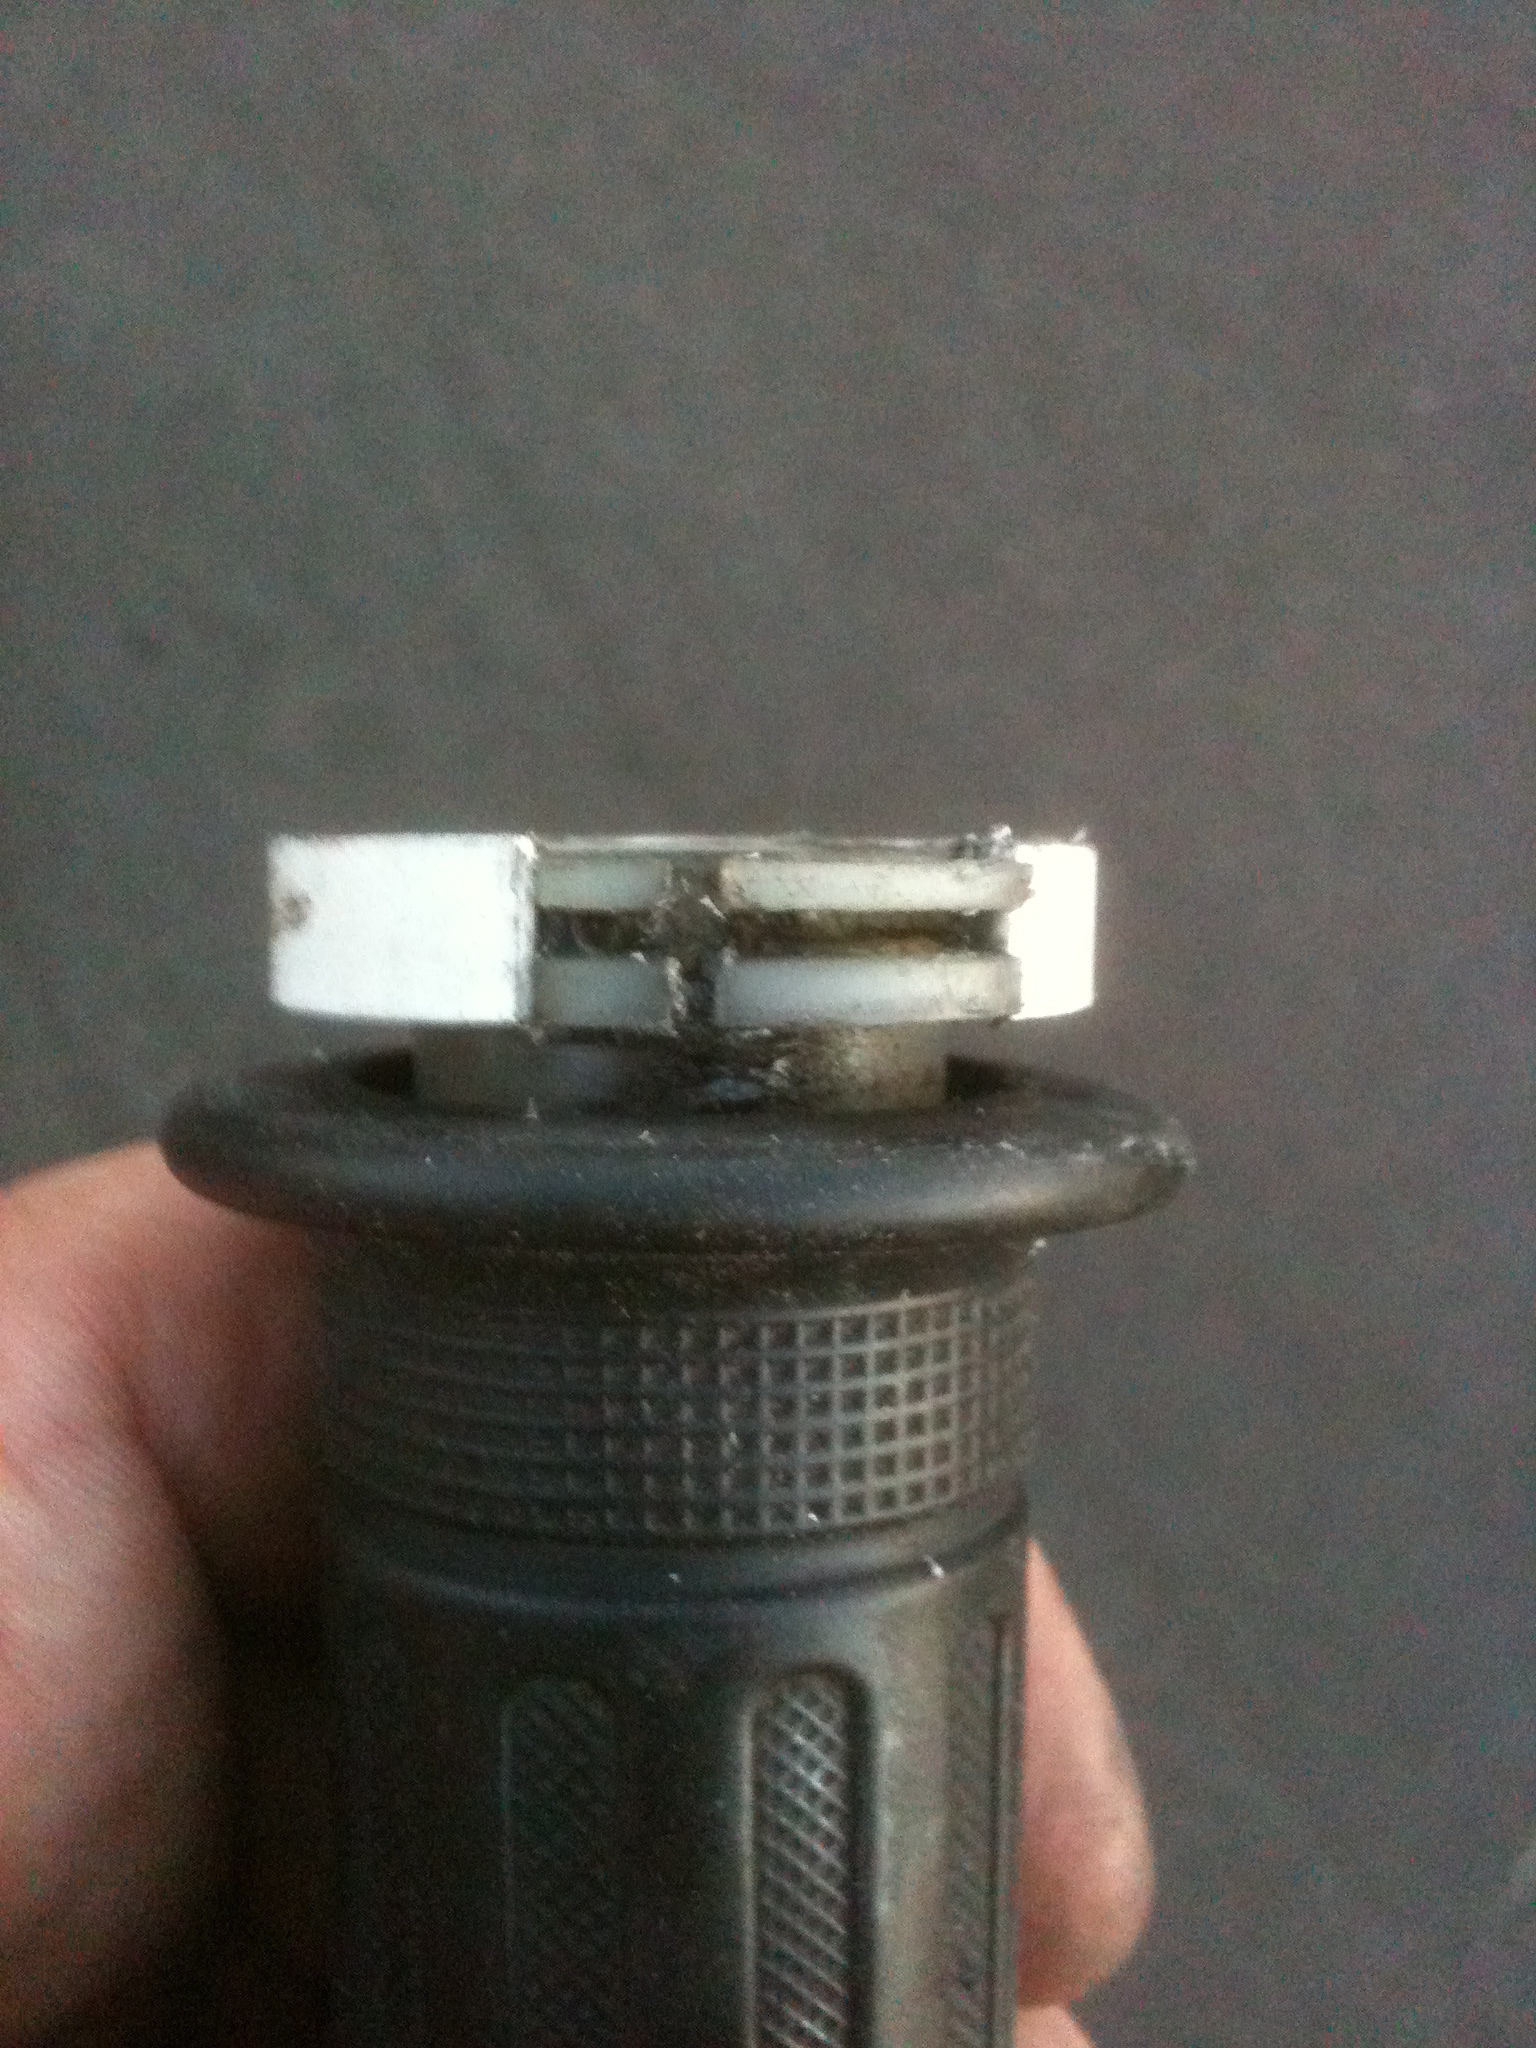 A thin slice of pvc fitted into the groove for the cable worked very well